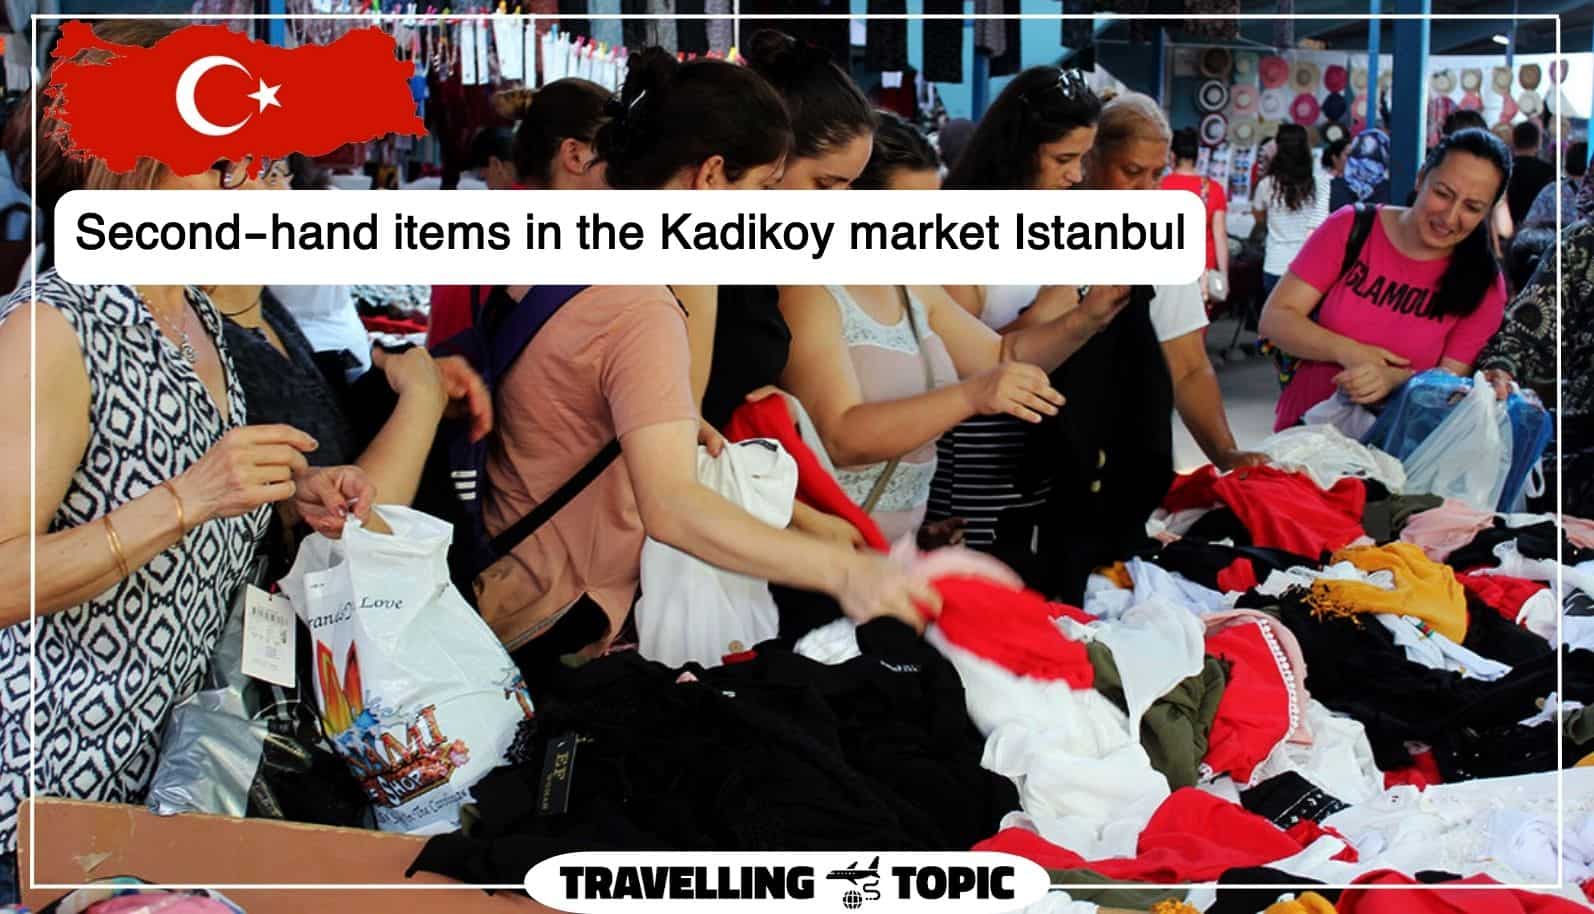 Second-hand items in the Kadikoy market Istanbul